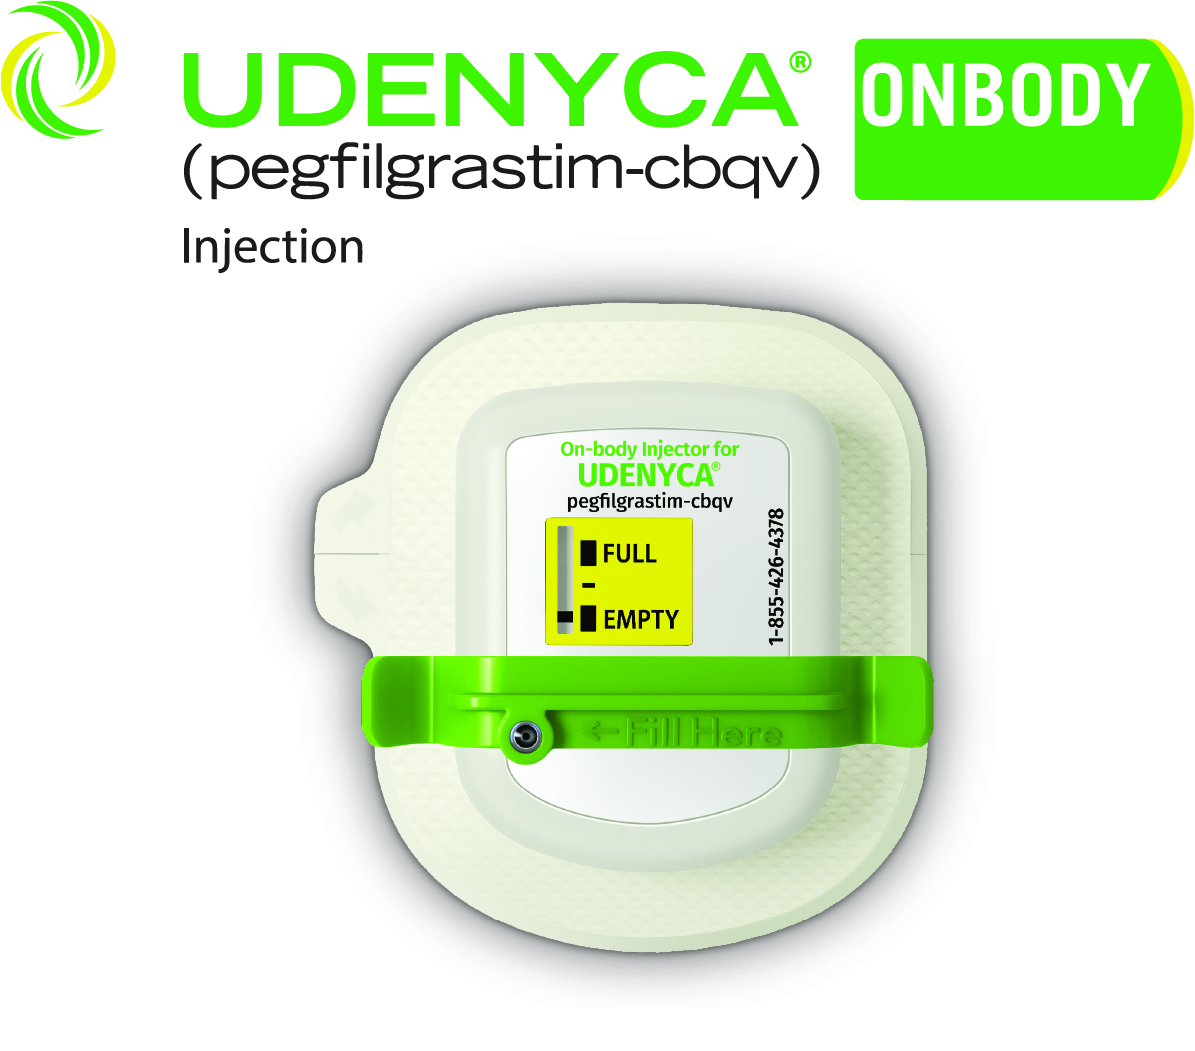 UDENYCA ONBODY™ a Novel and Proprietary State-of-the-Art Delivery System for pegfilgrastim-cbqvFull Prescribing Information, including instructions for use, is available at www.UDENYCA.com